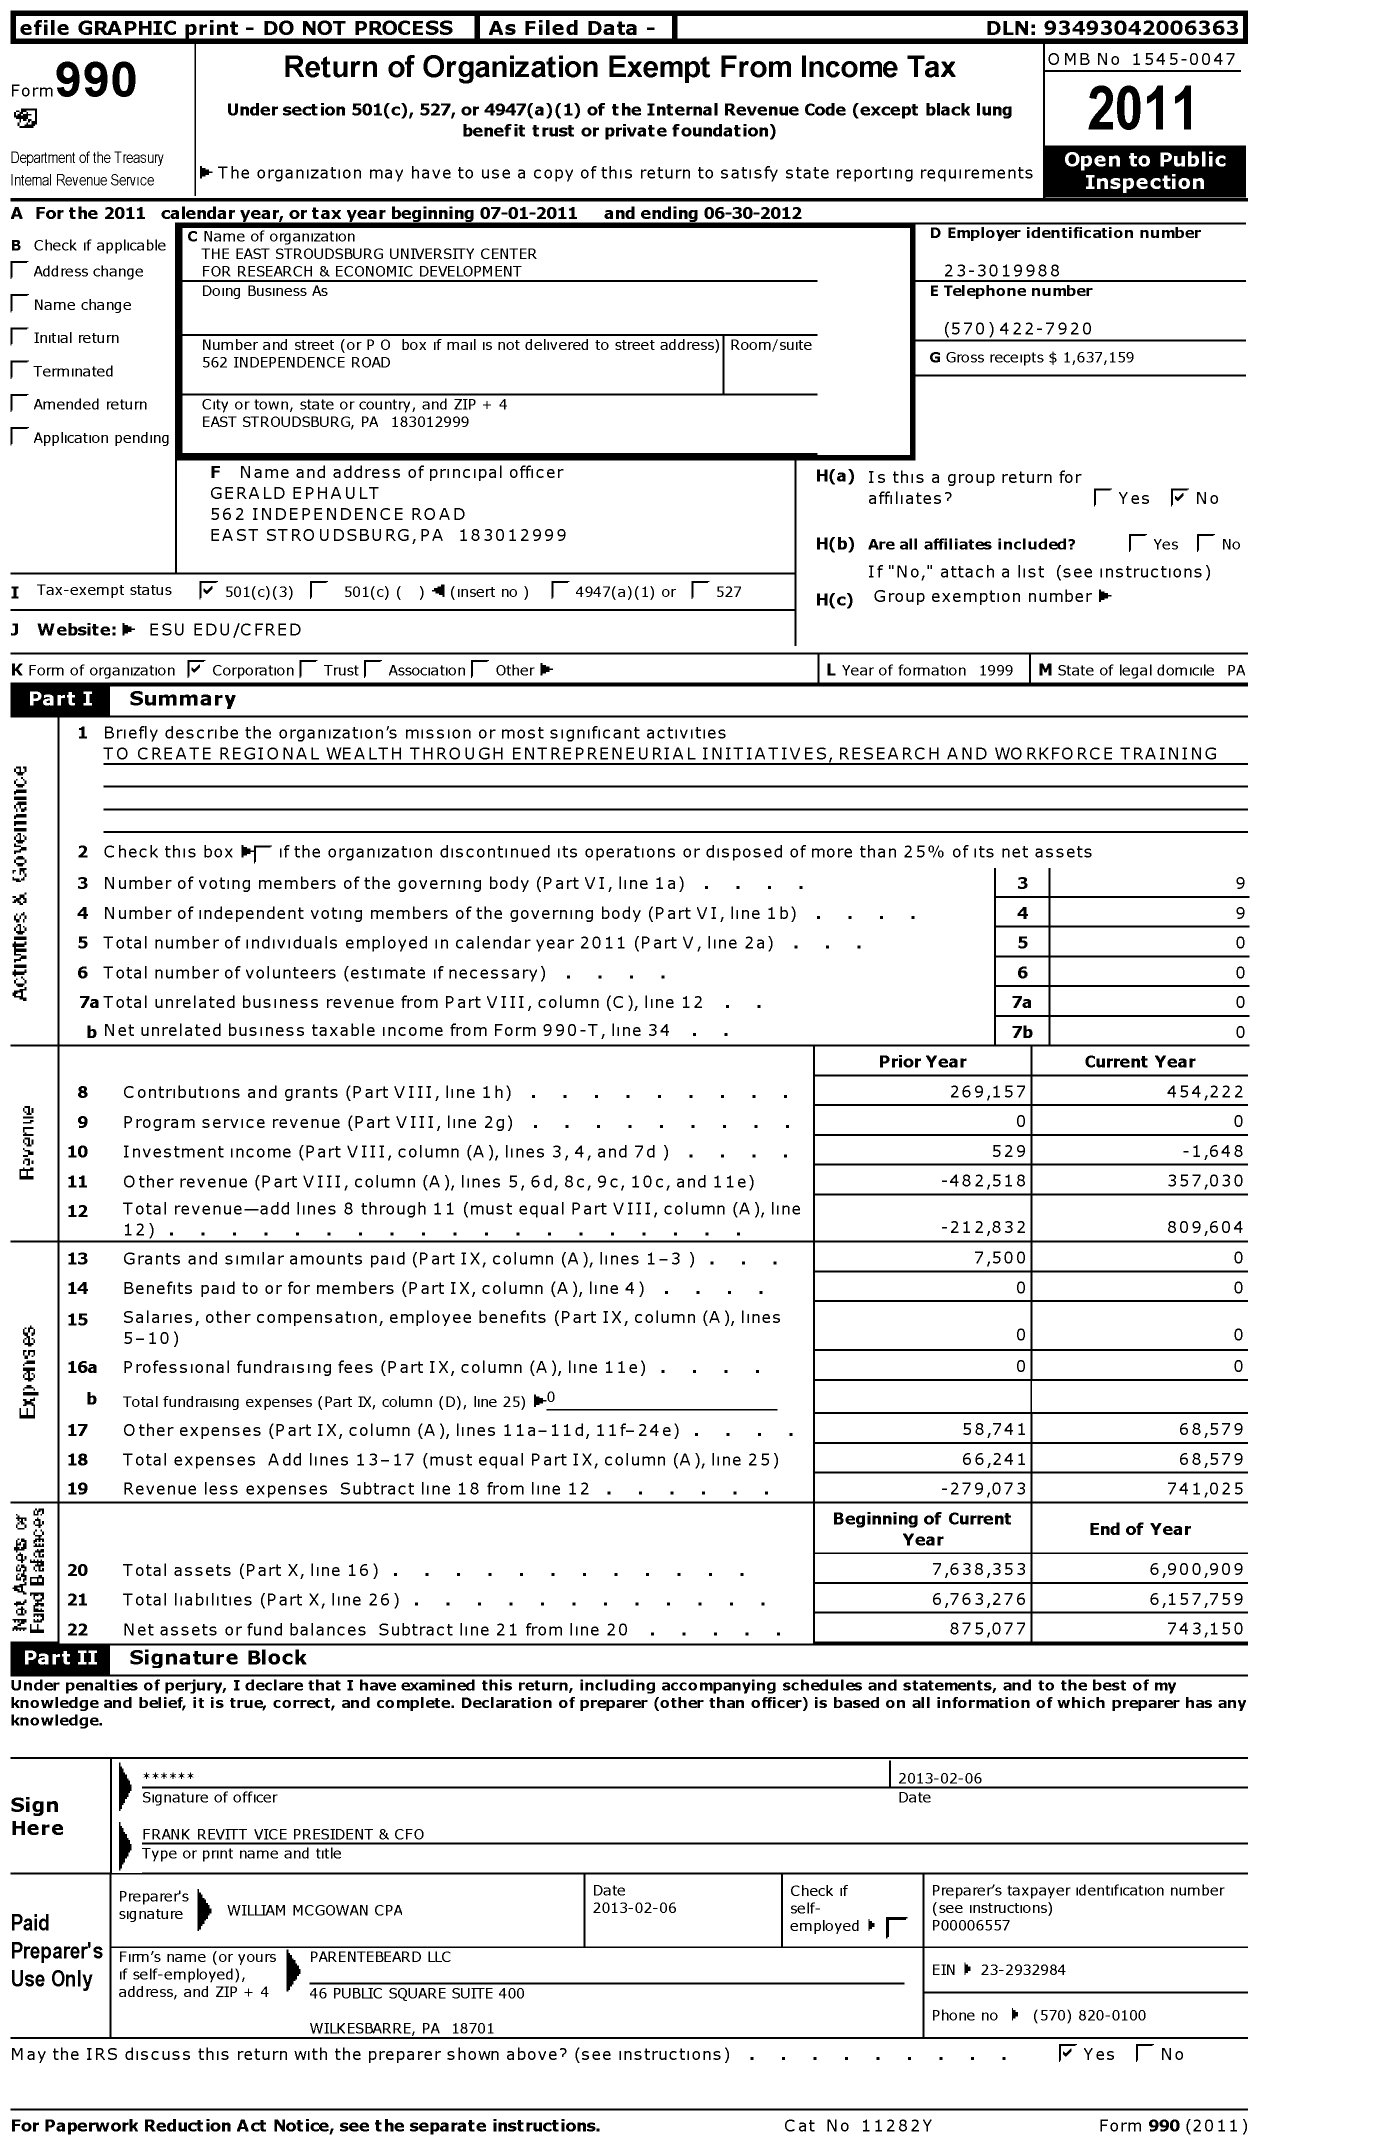 Image of first page of 2011 Form 990 for East Stroudsburg University Center for Research and Economic DVLPMNT